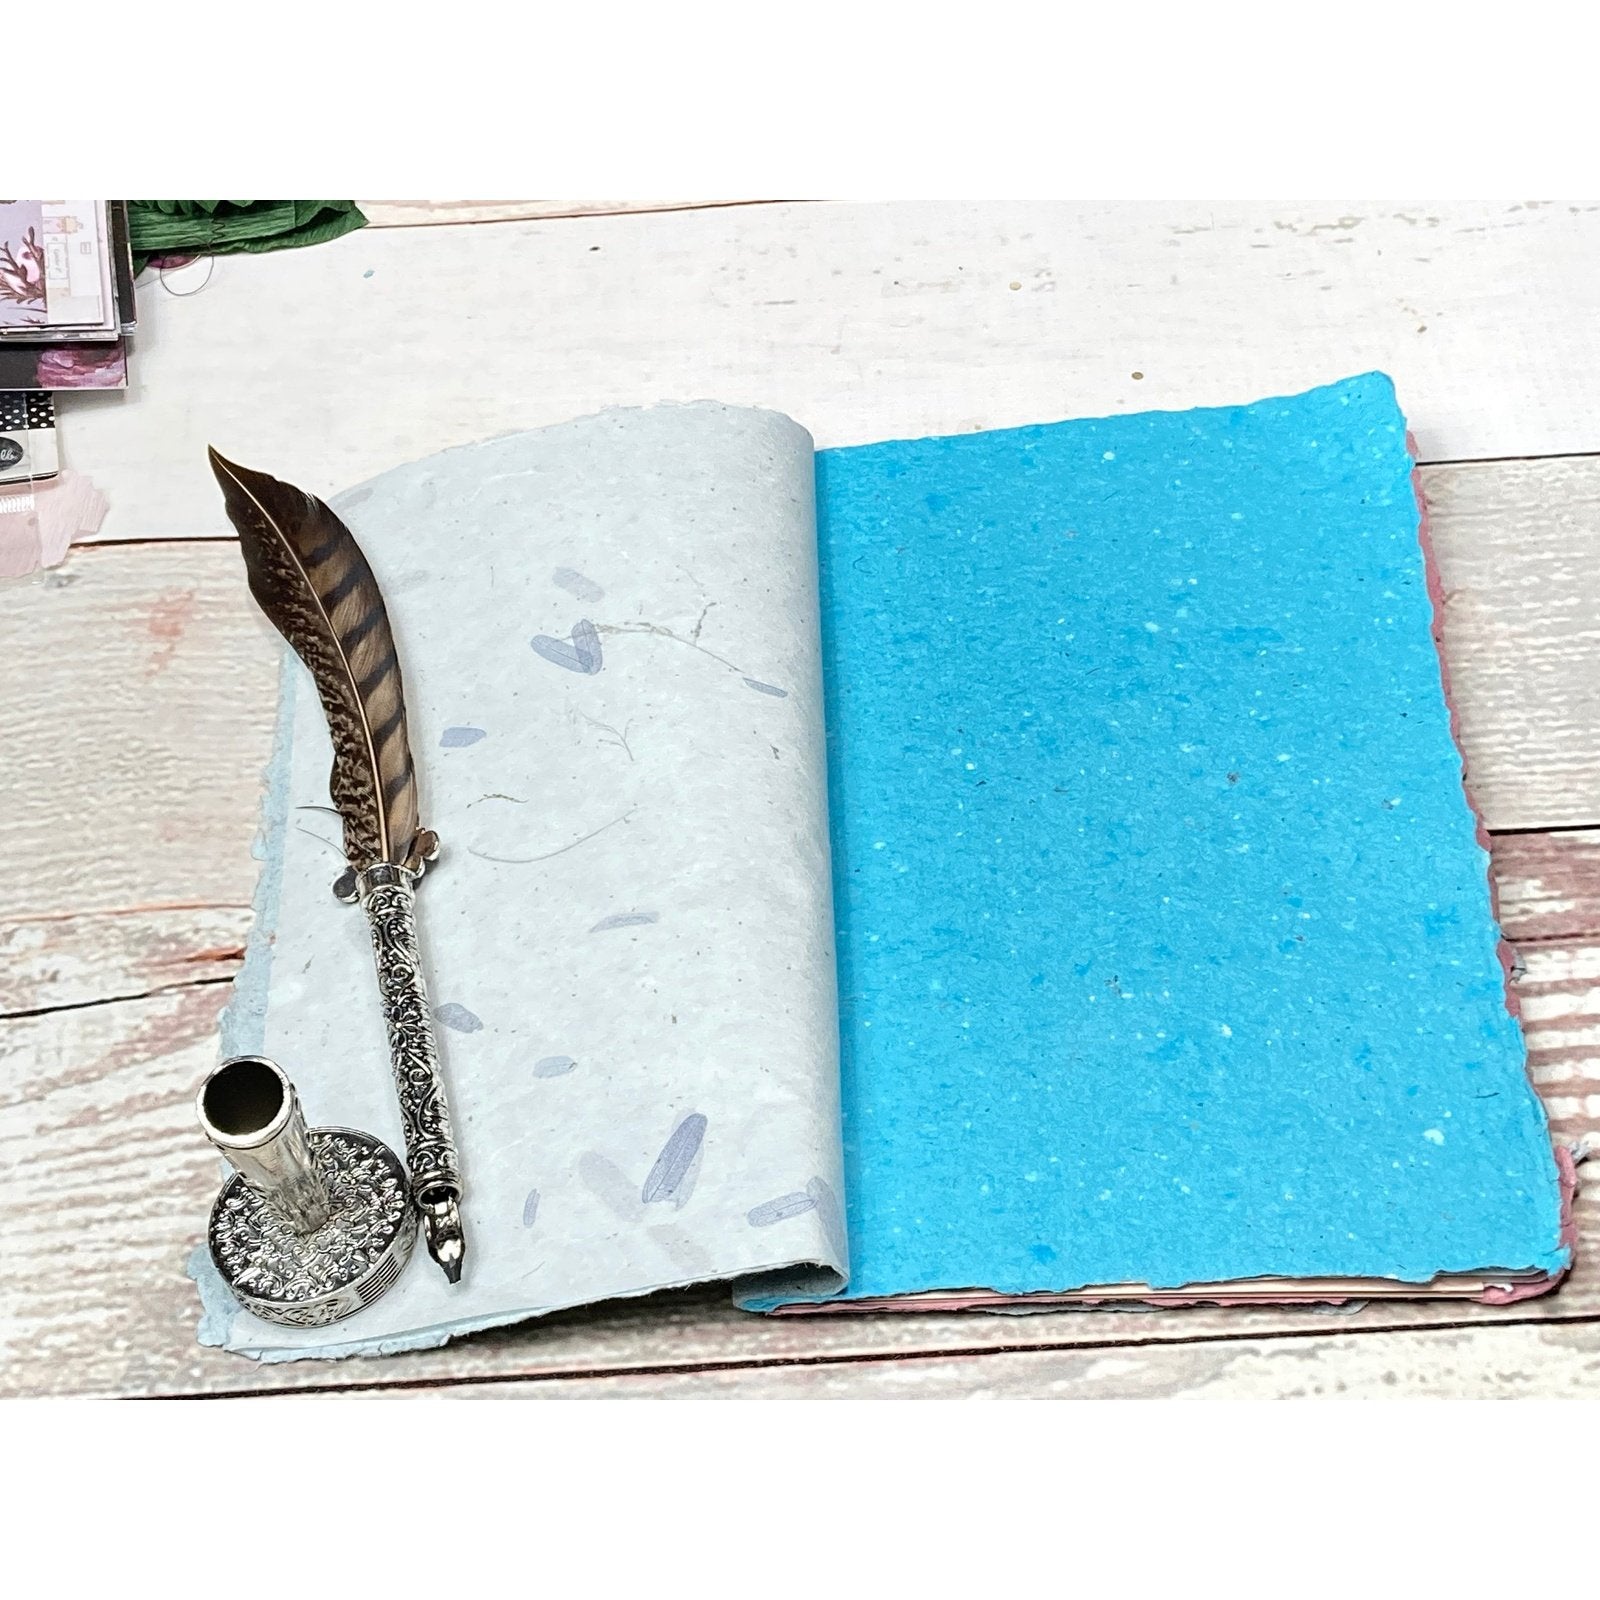 Botanical Art Journal with Handmade Paper Cover, Variety of Mixed Media Pages, Hand Sewn Binding with Stick Inserted